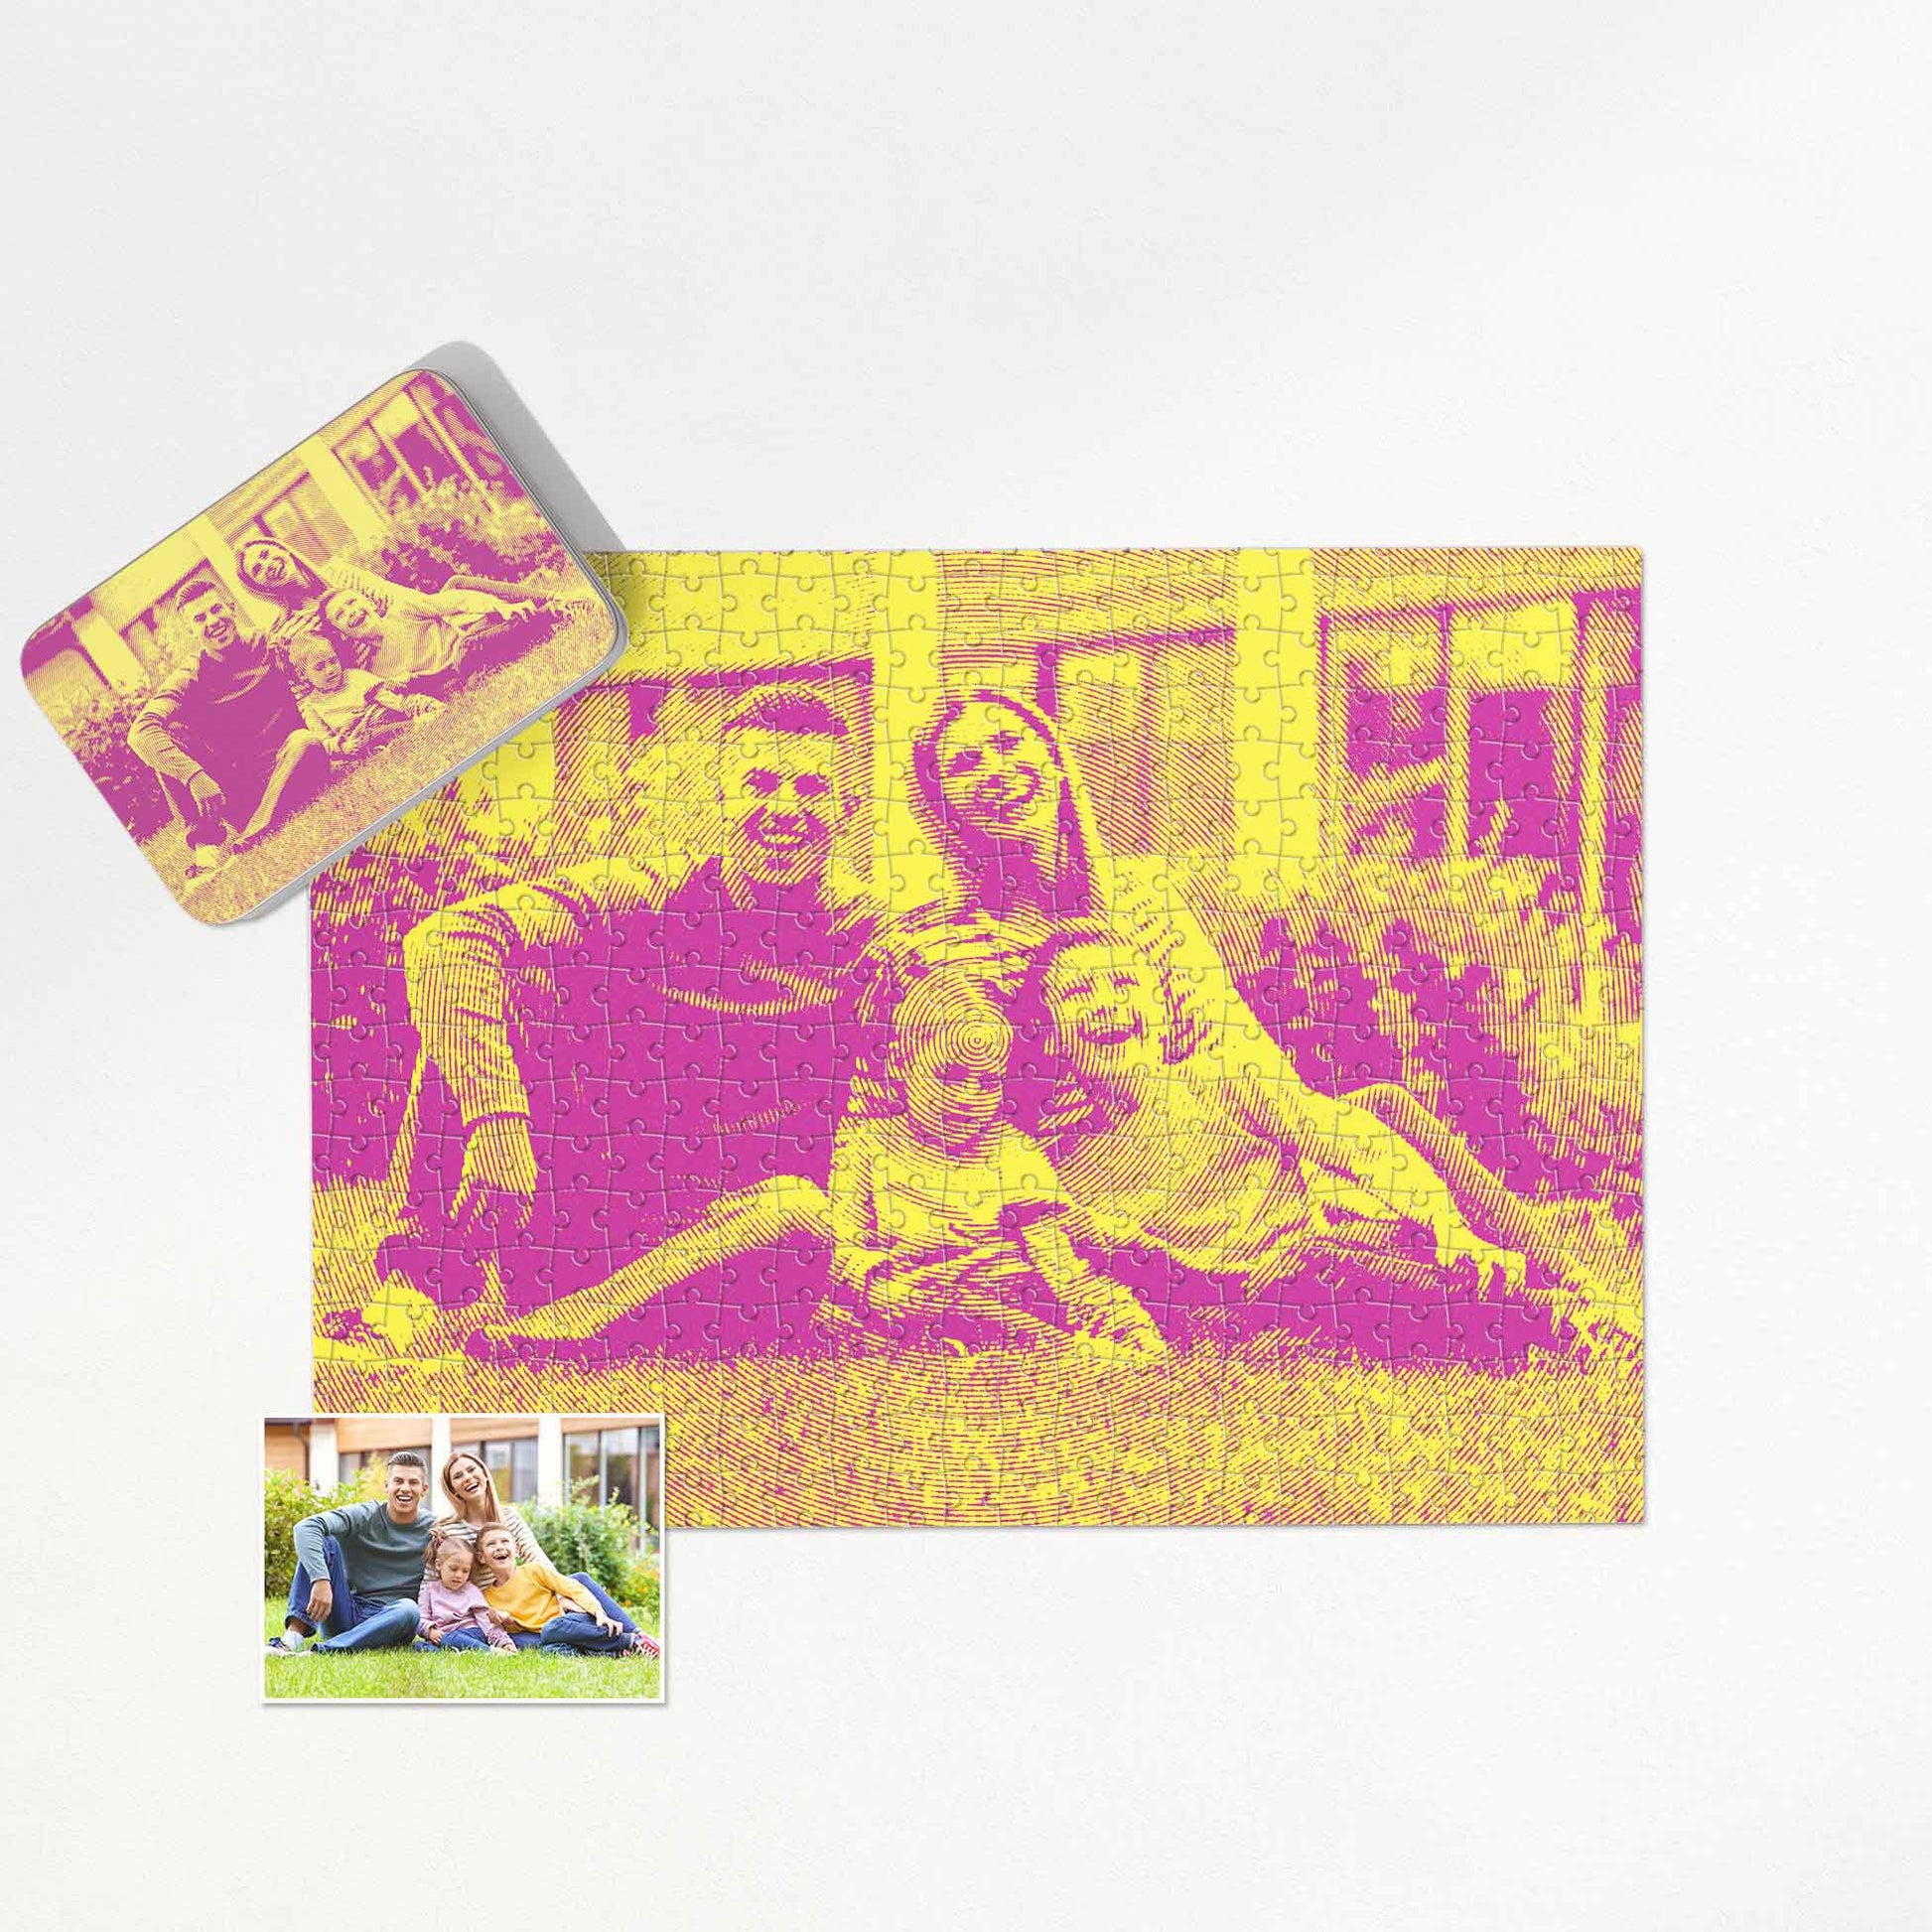 Looking for a unique gift? Try our Personalised Yellow & Pink Texture Jigsaw Puzzle. The abstract style print from photo showcases cool yellow and pink hues. Handmade with care, it's a fun and original art piece